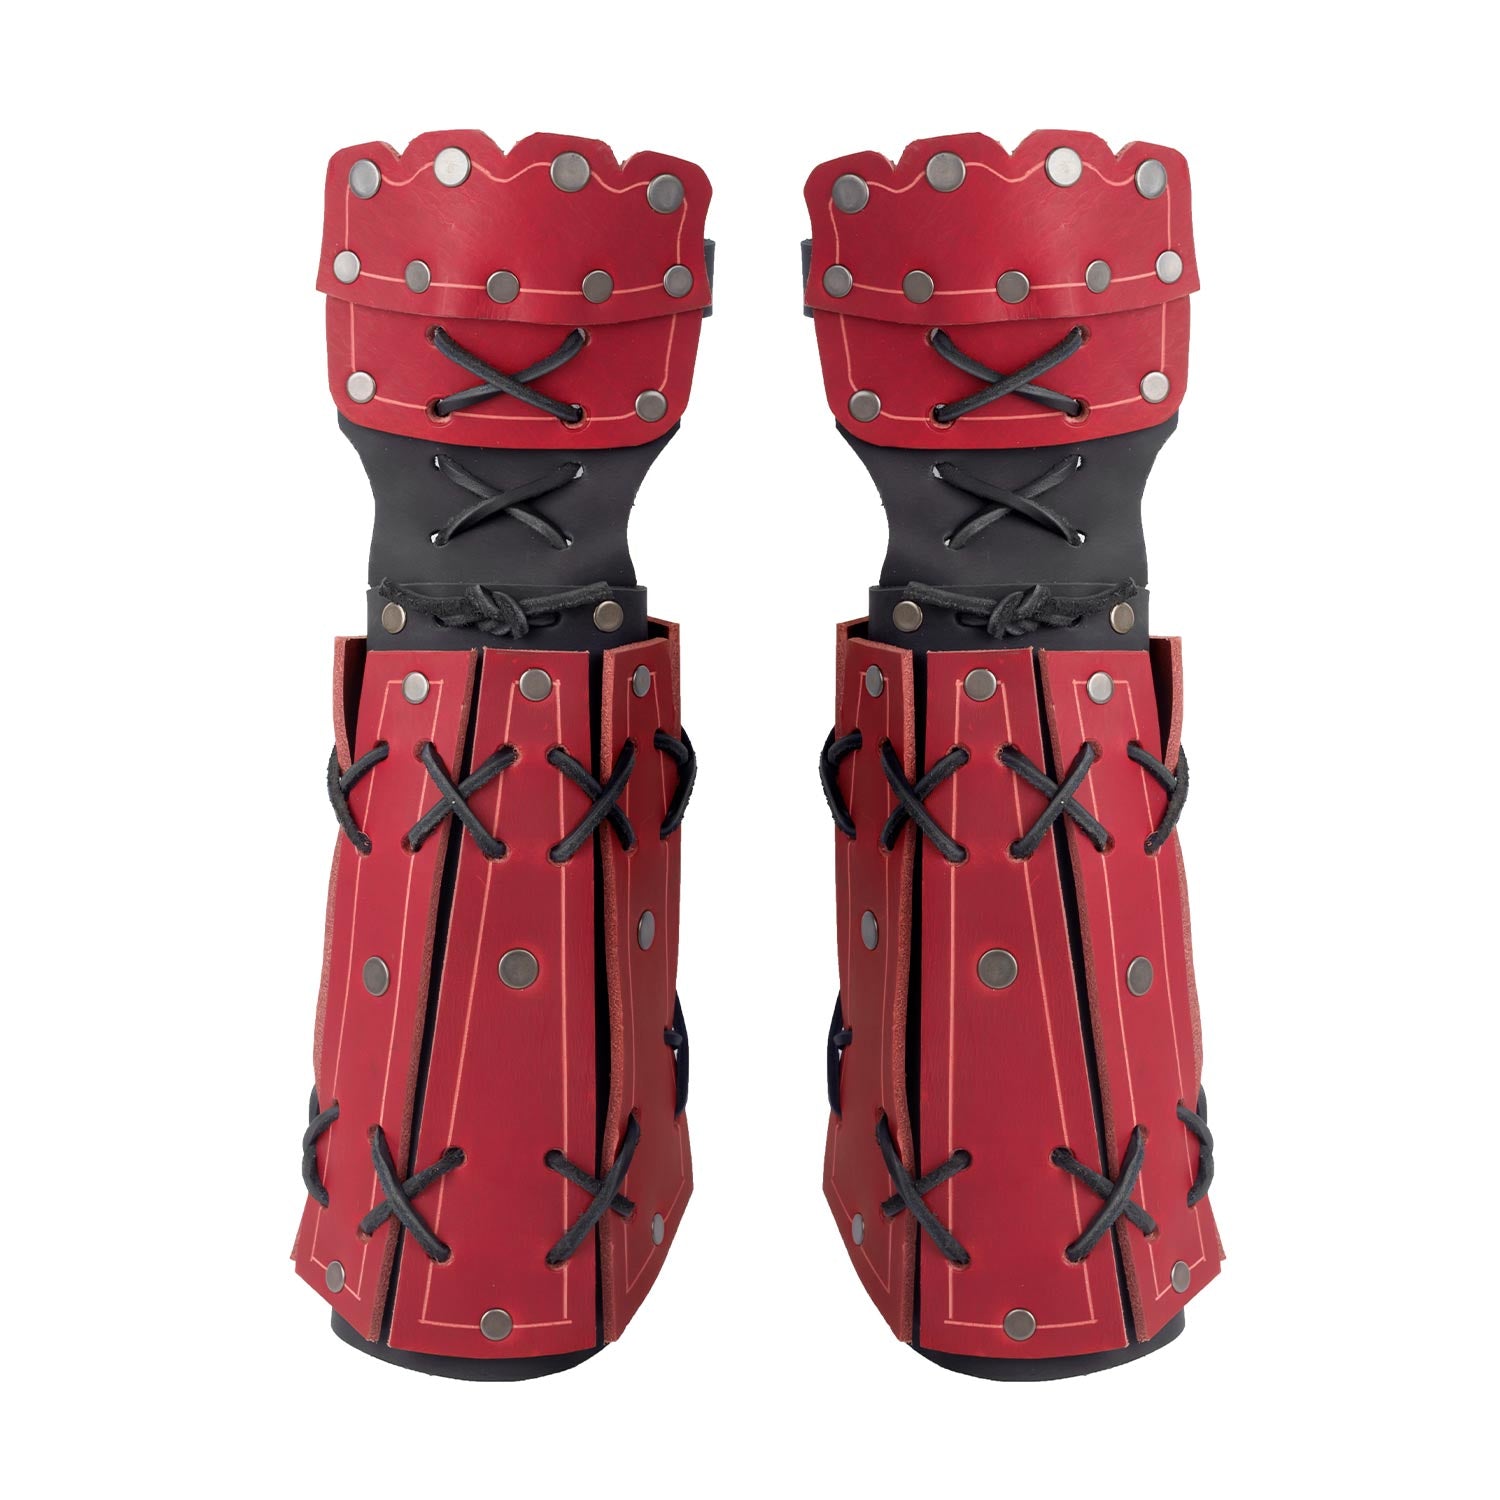  Medieval Leather Samurai Arm Bracers Guard Japanese Wrist Armor  for leather : Clothing, Shoes & Jewelry